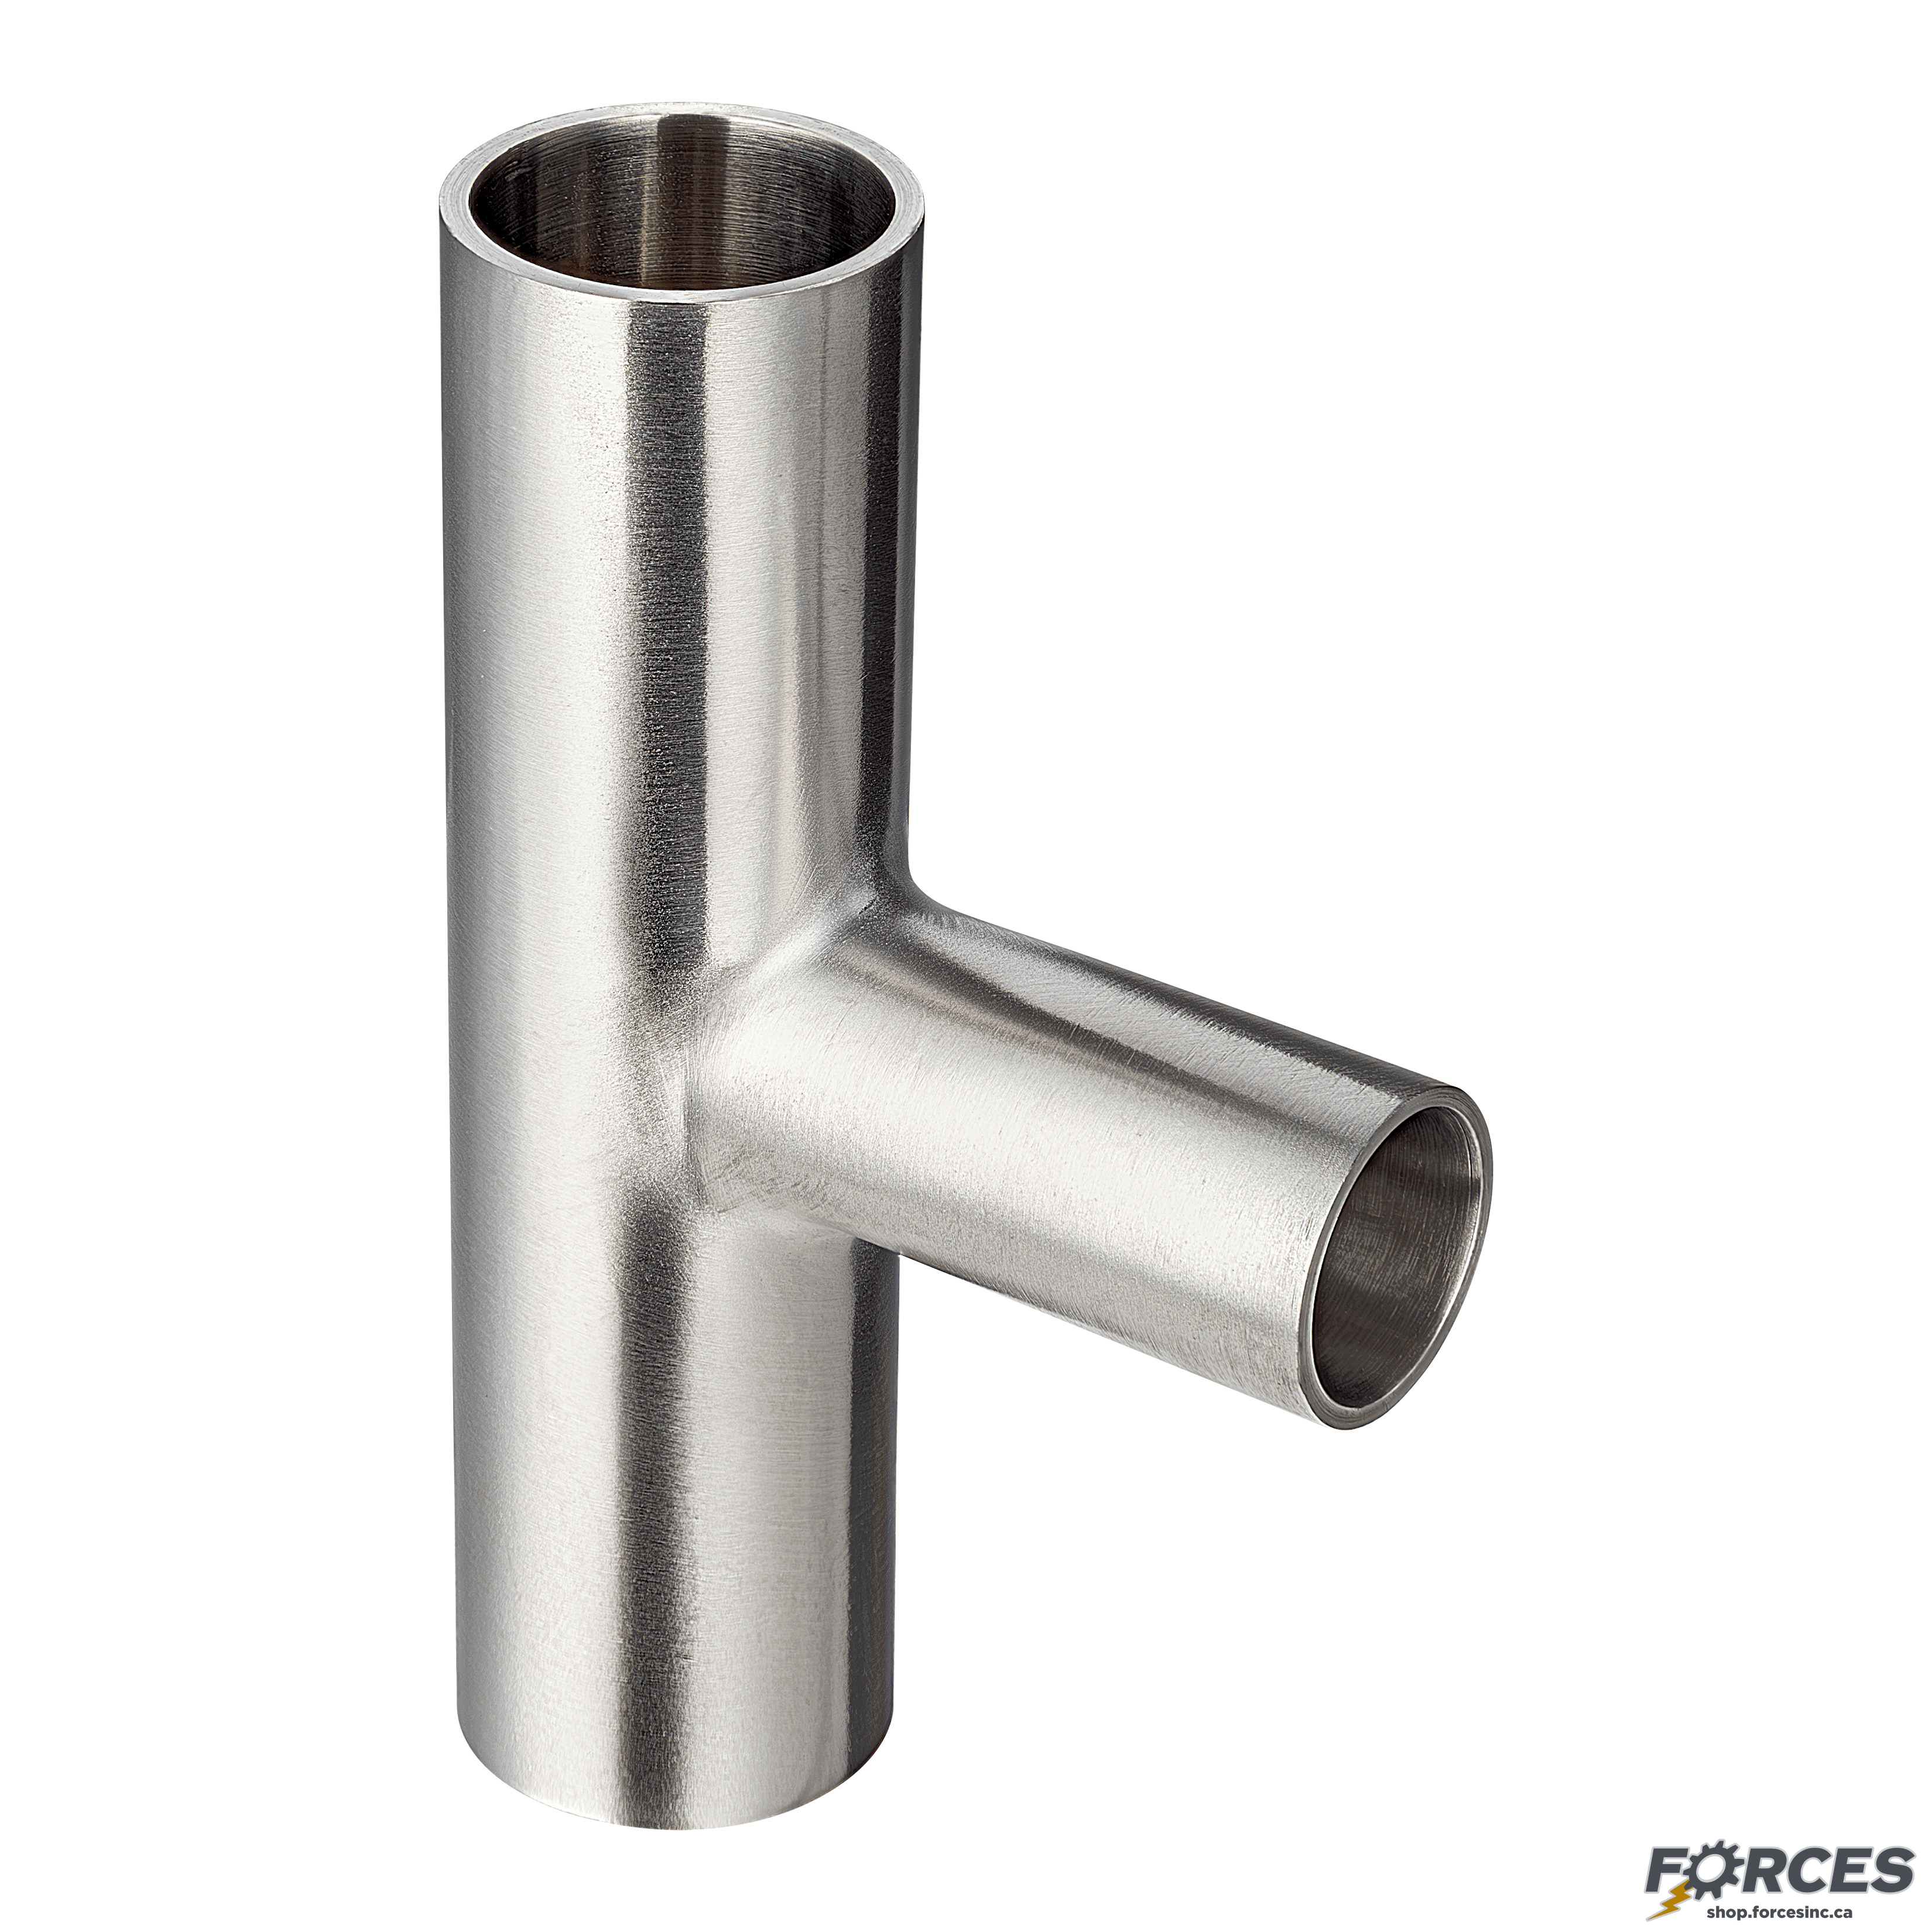 2" x 1/2" Butt Weld Tee Reducer - Stainless Steel 316 - Forces Inc